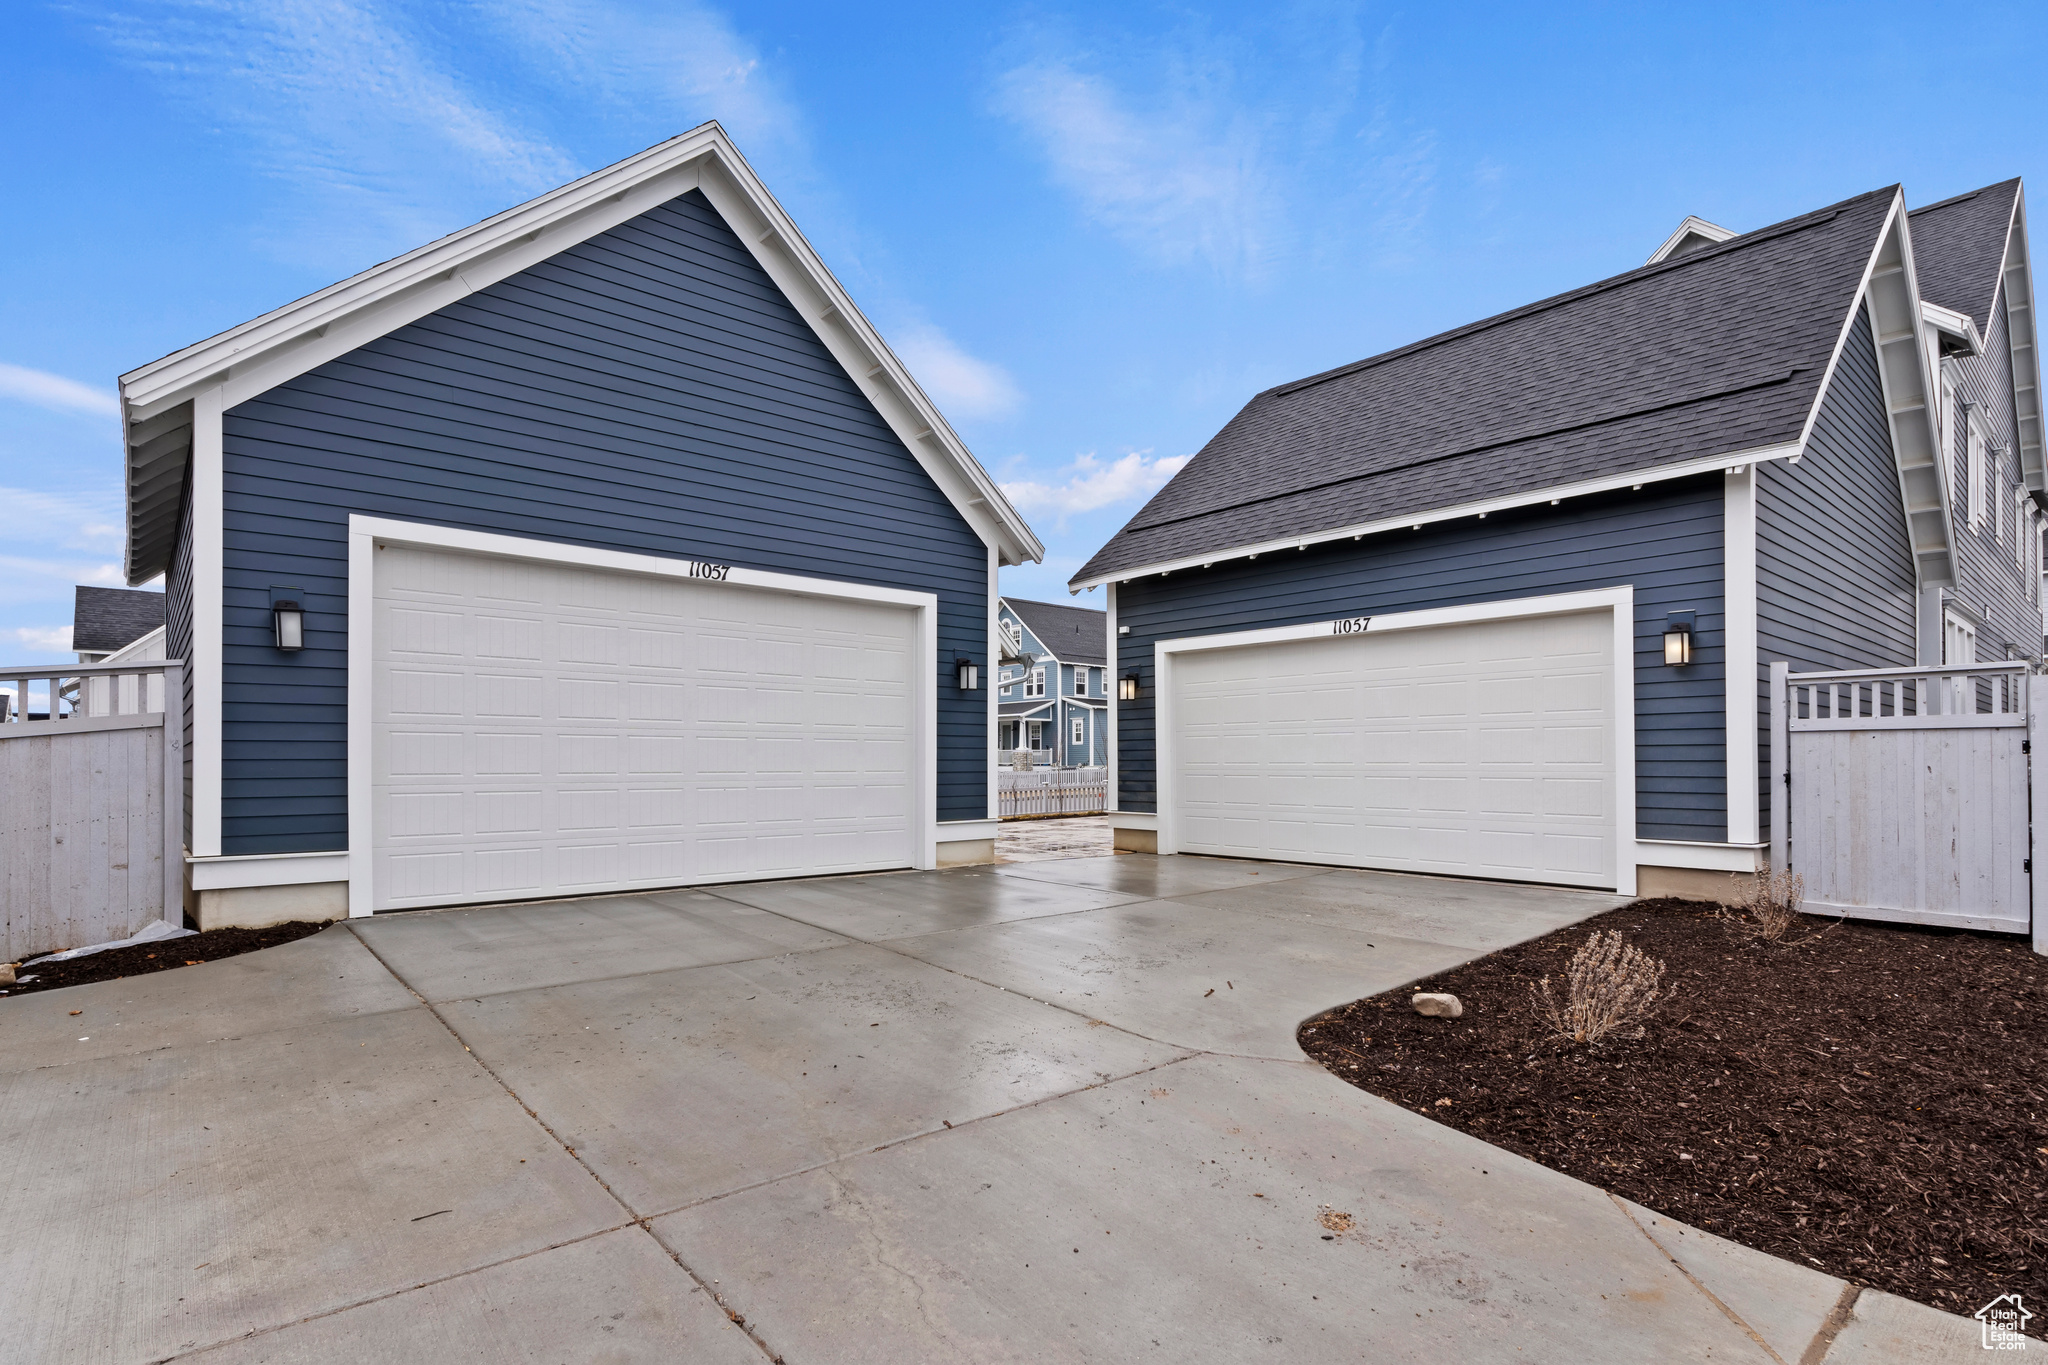 View of driveway featuring both garages and plenty of parking space